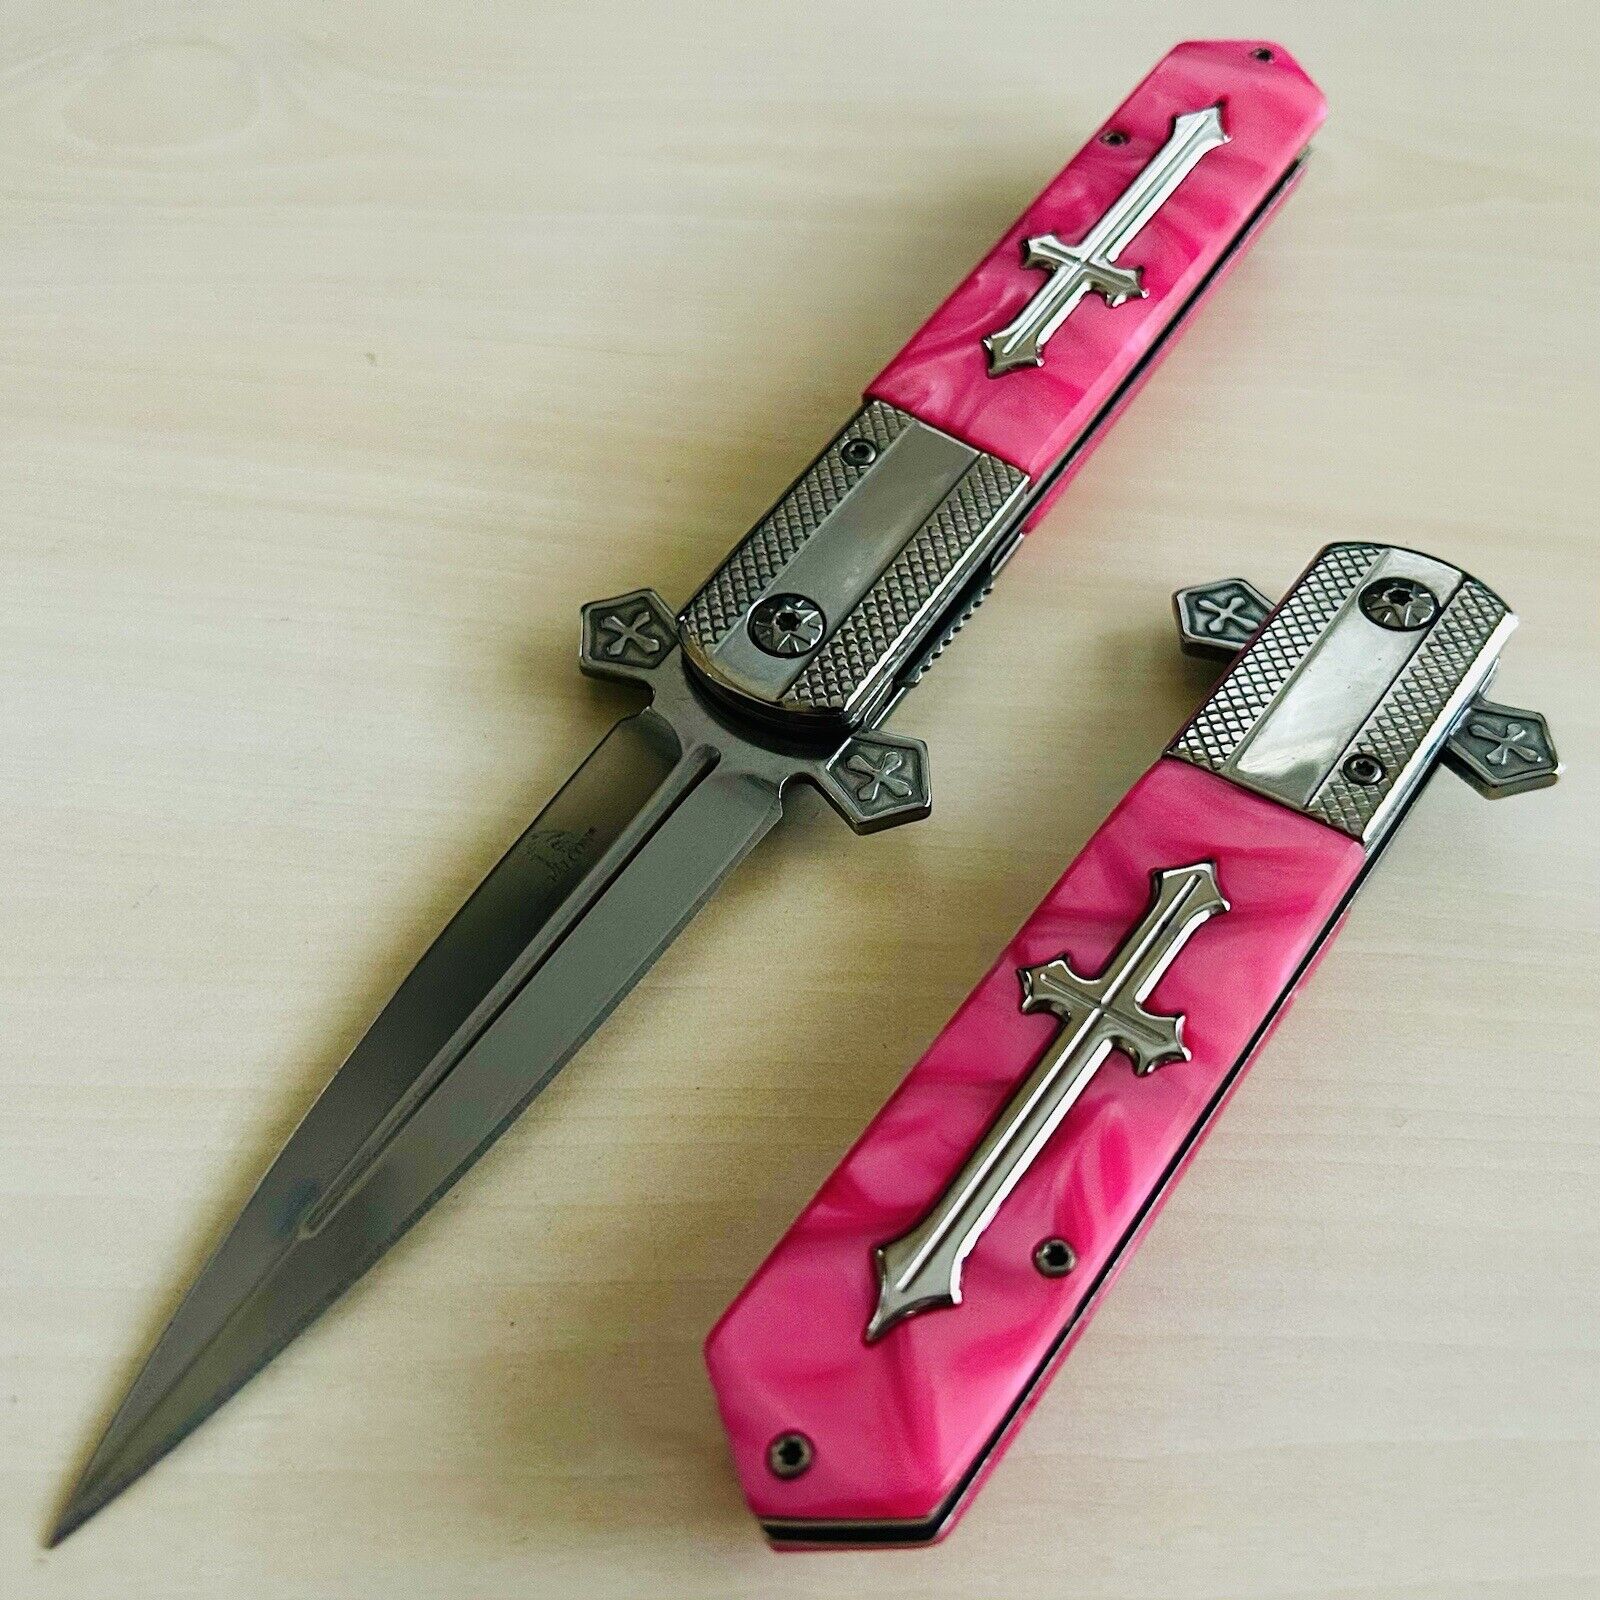 9” Pink Cross Tactical Spring Assisted Folding Pocket Knife Girl’s Knife w/Clip